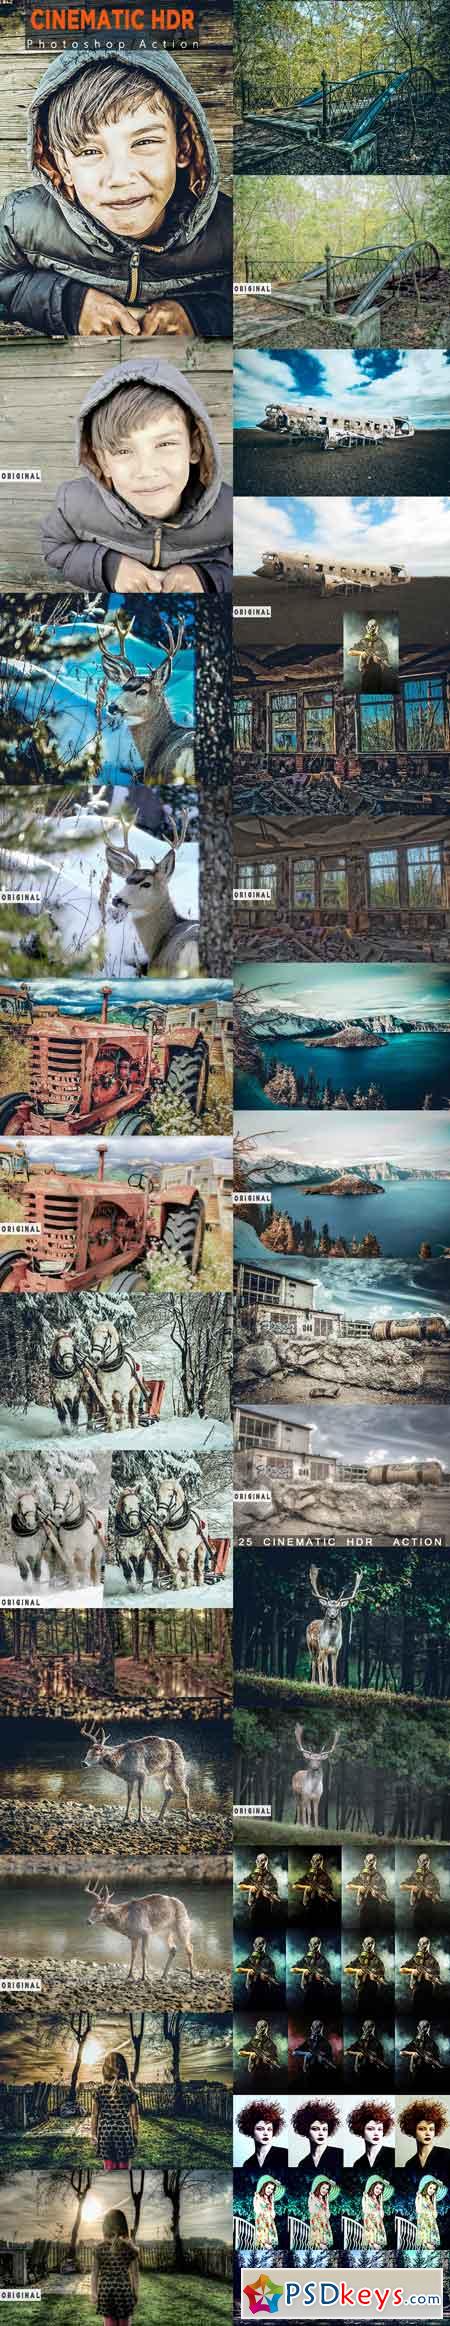 25 Cinematic HDR Photoshop Action 22643006